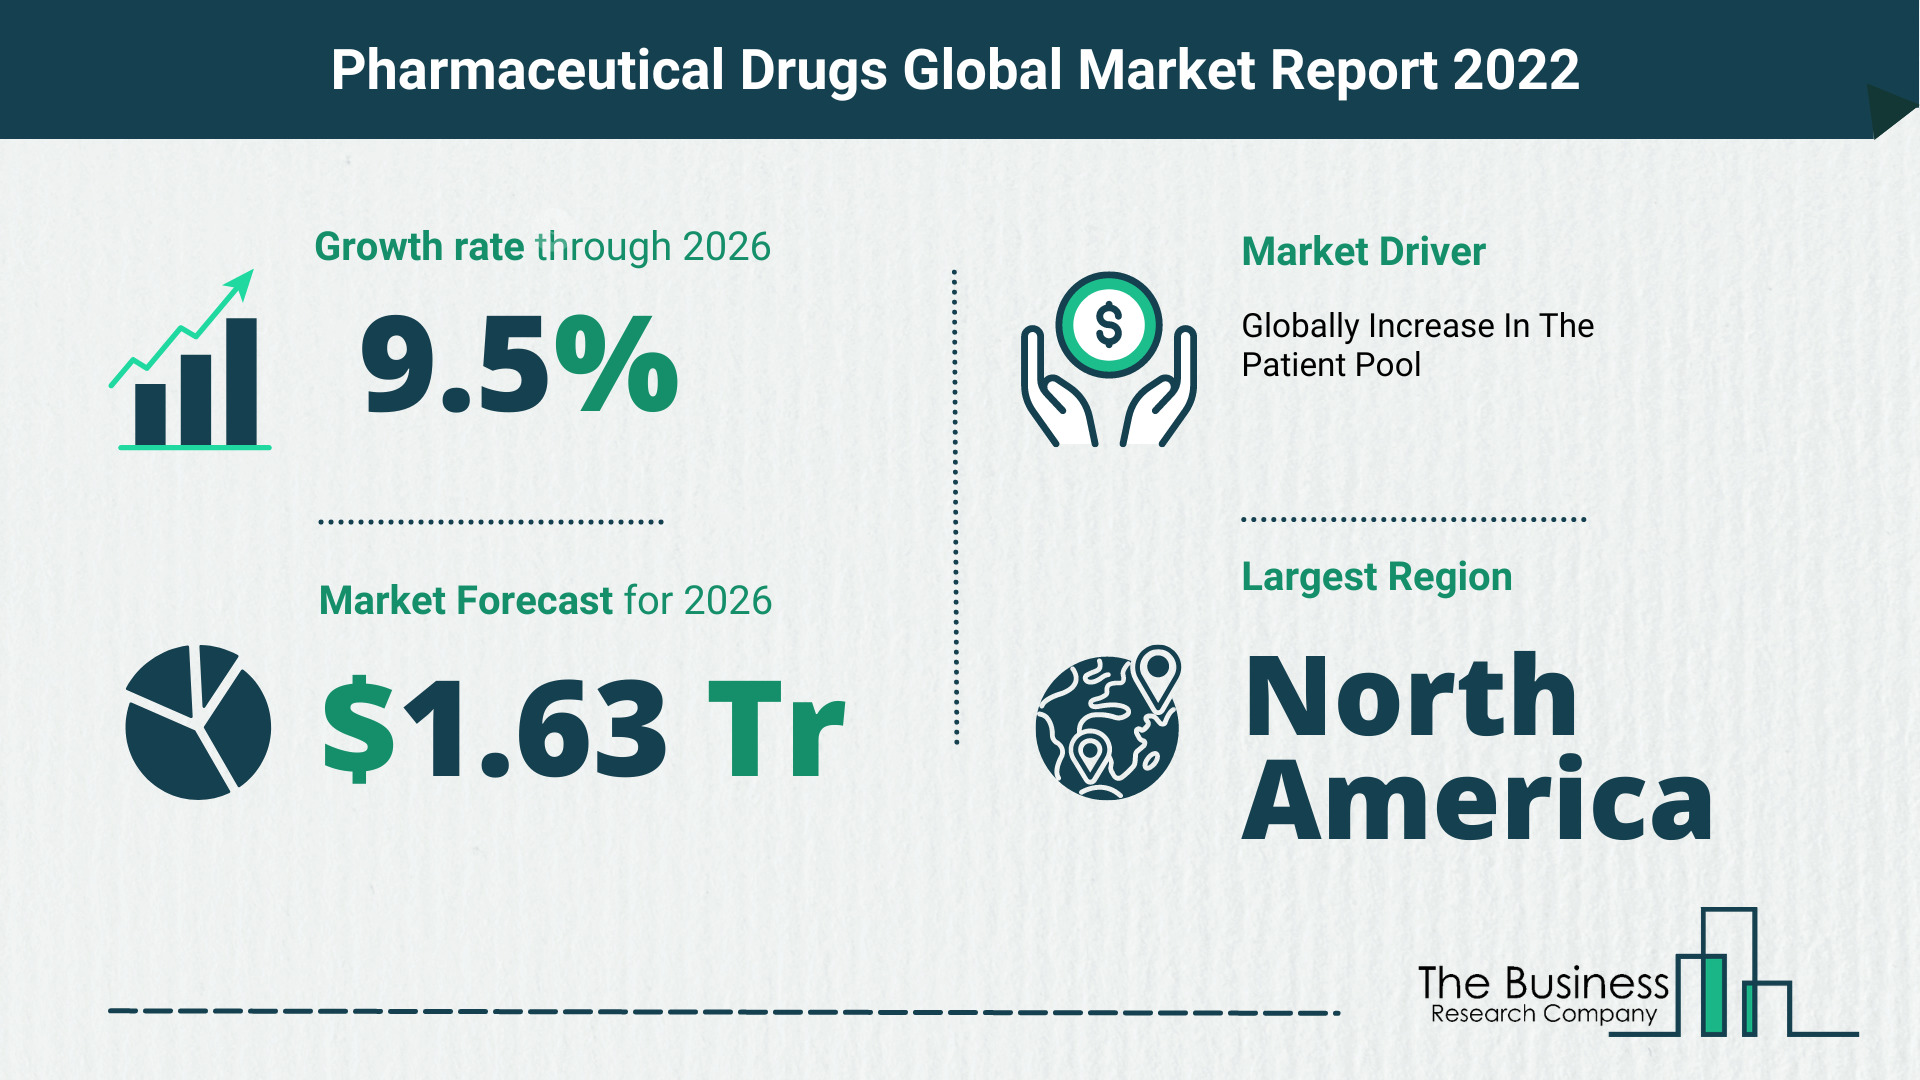 Latest Pharmaceutical Drugs Market Growth Study 2022-2026 By The Business Research Company